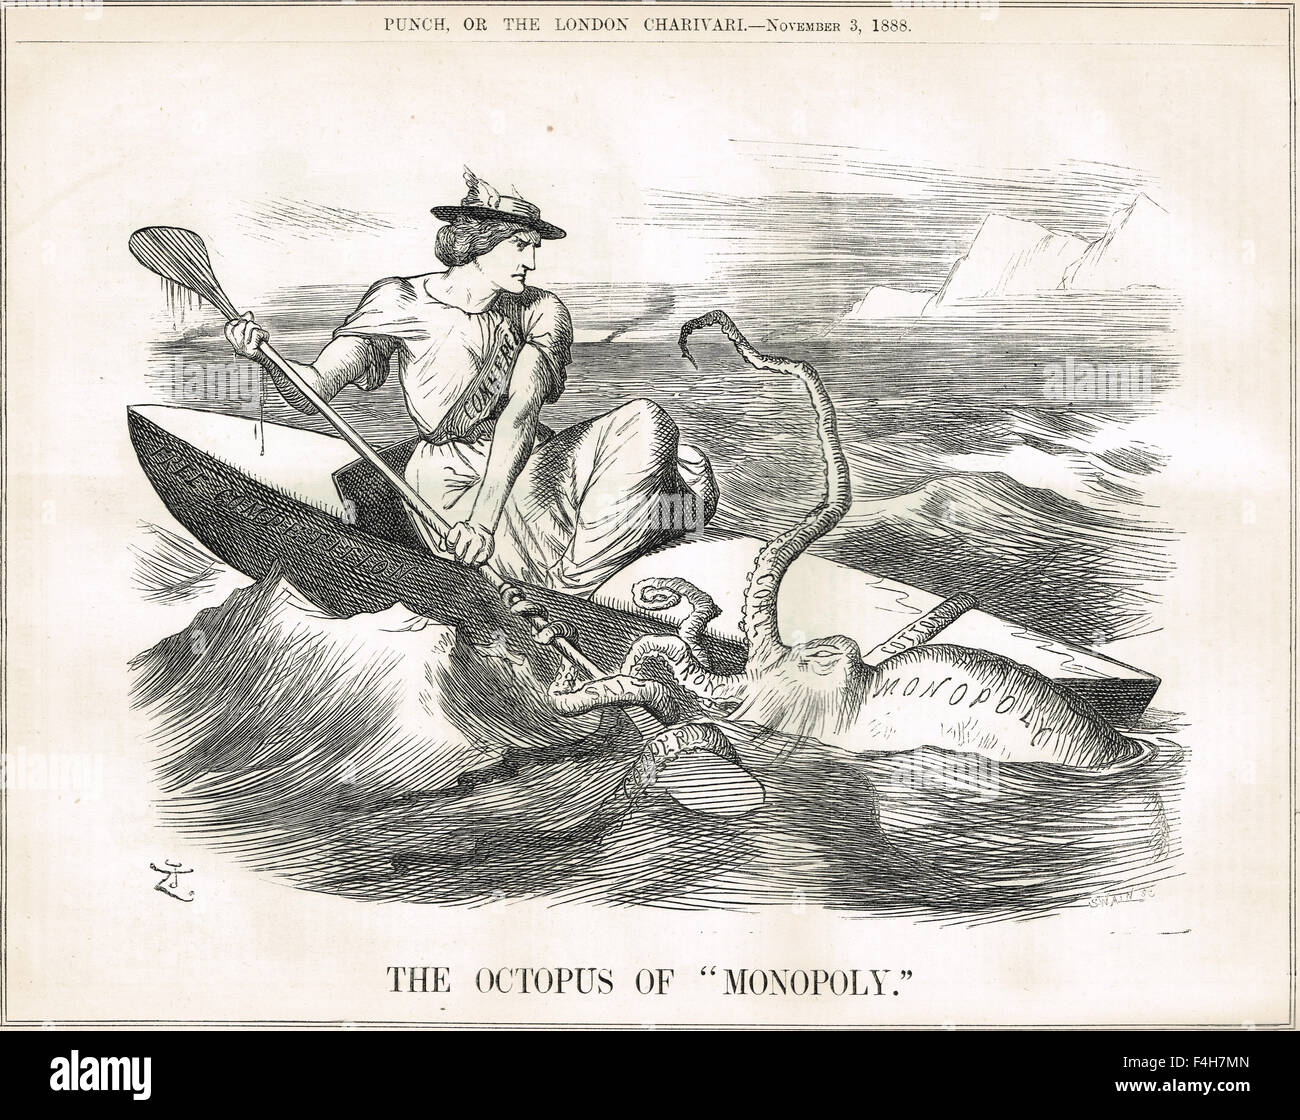 Octopus of Monopoly versus free competition. John Tenniel Punch cartoon 1888 Stock Photo